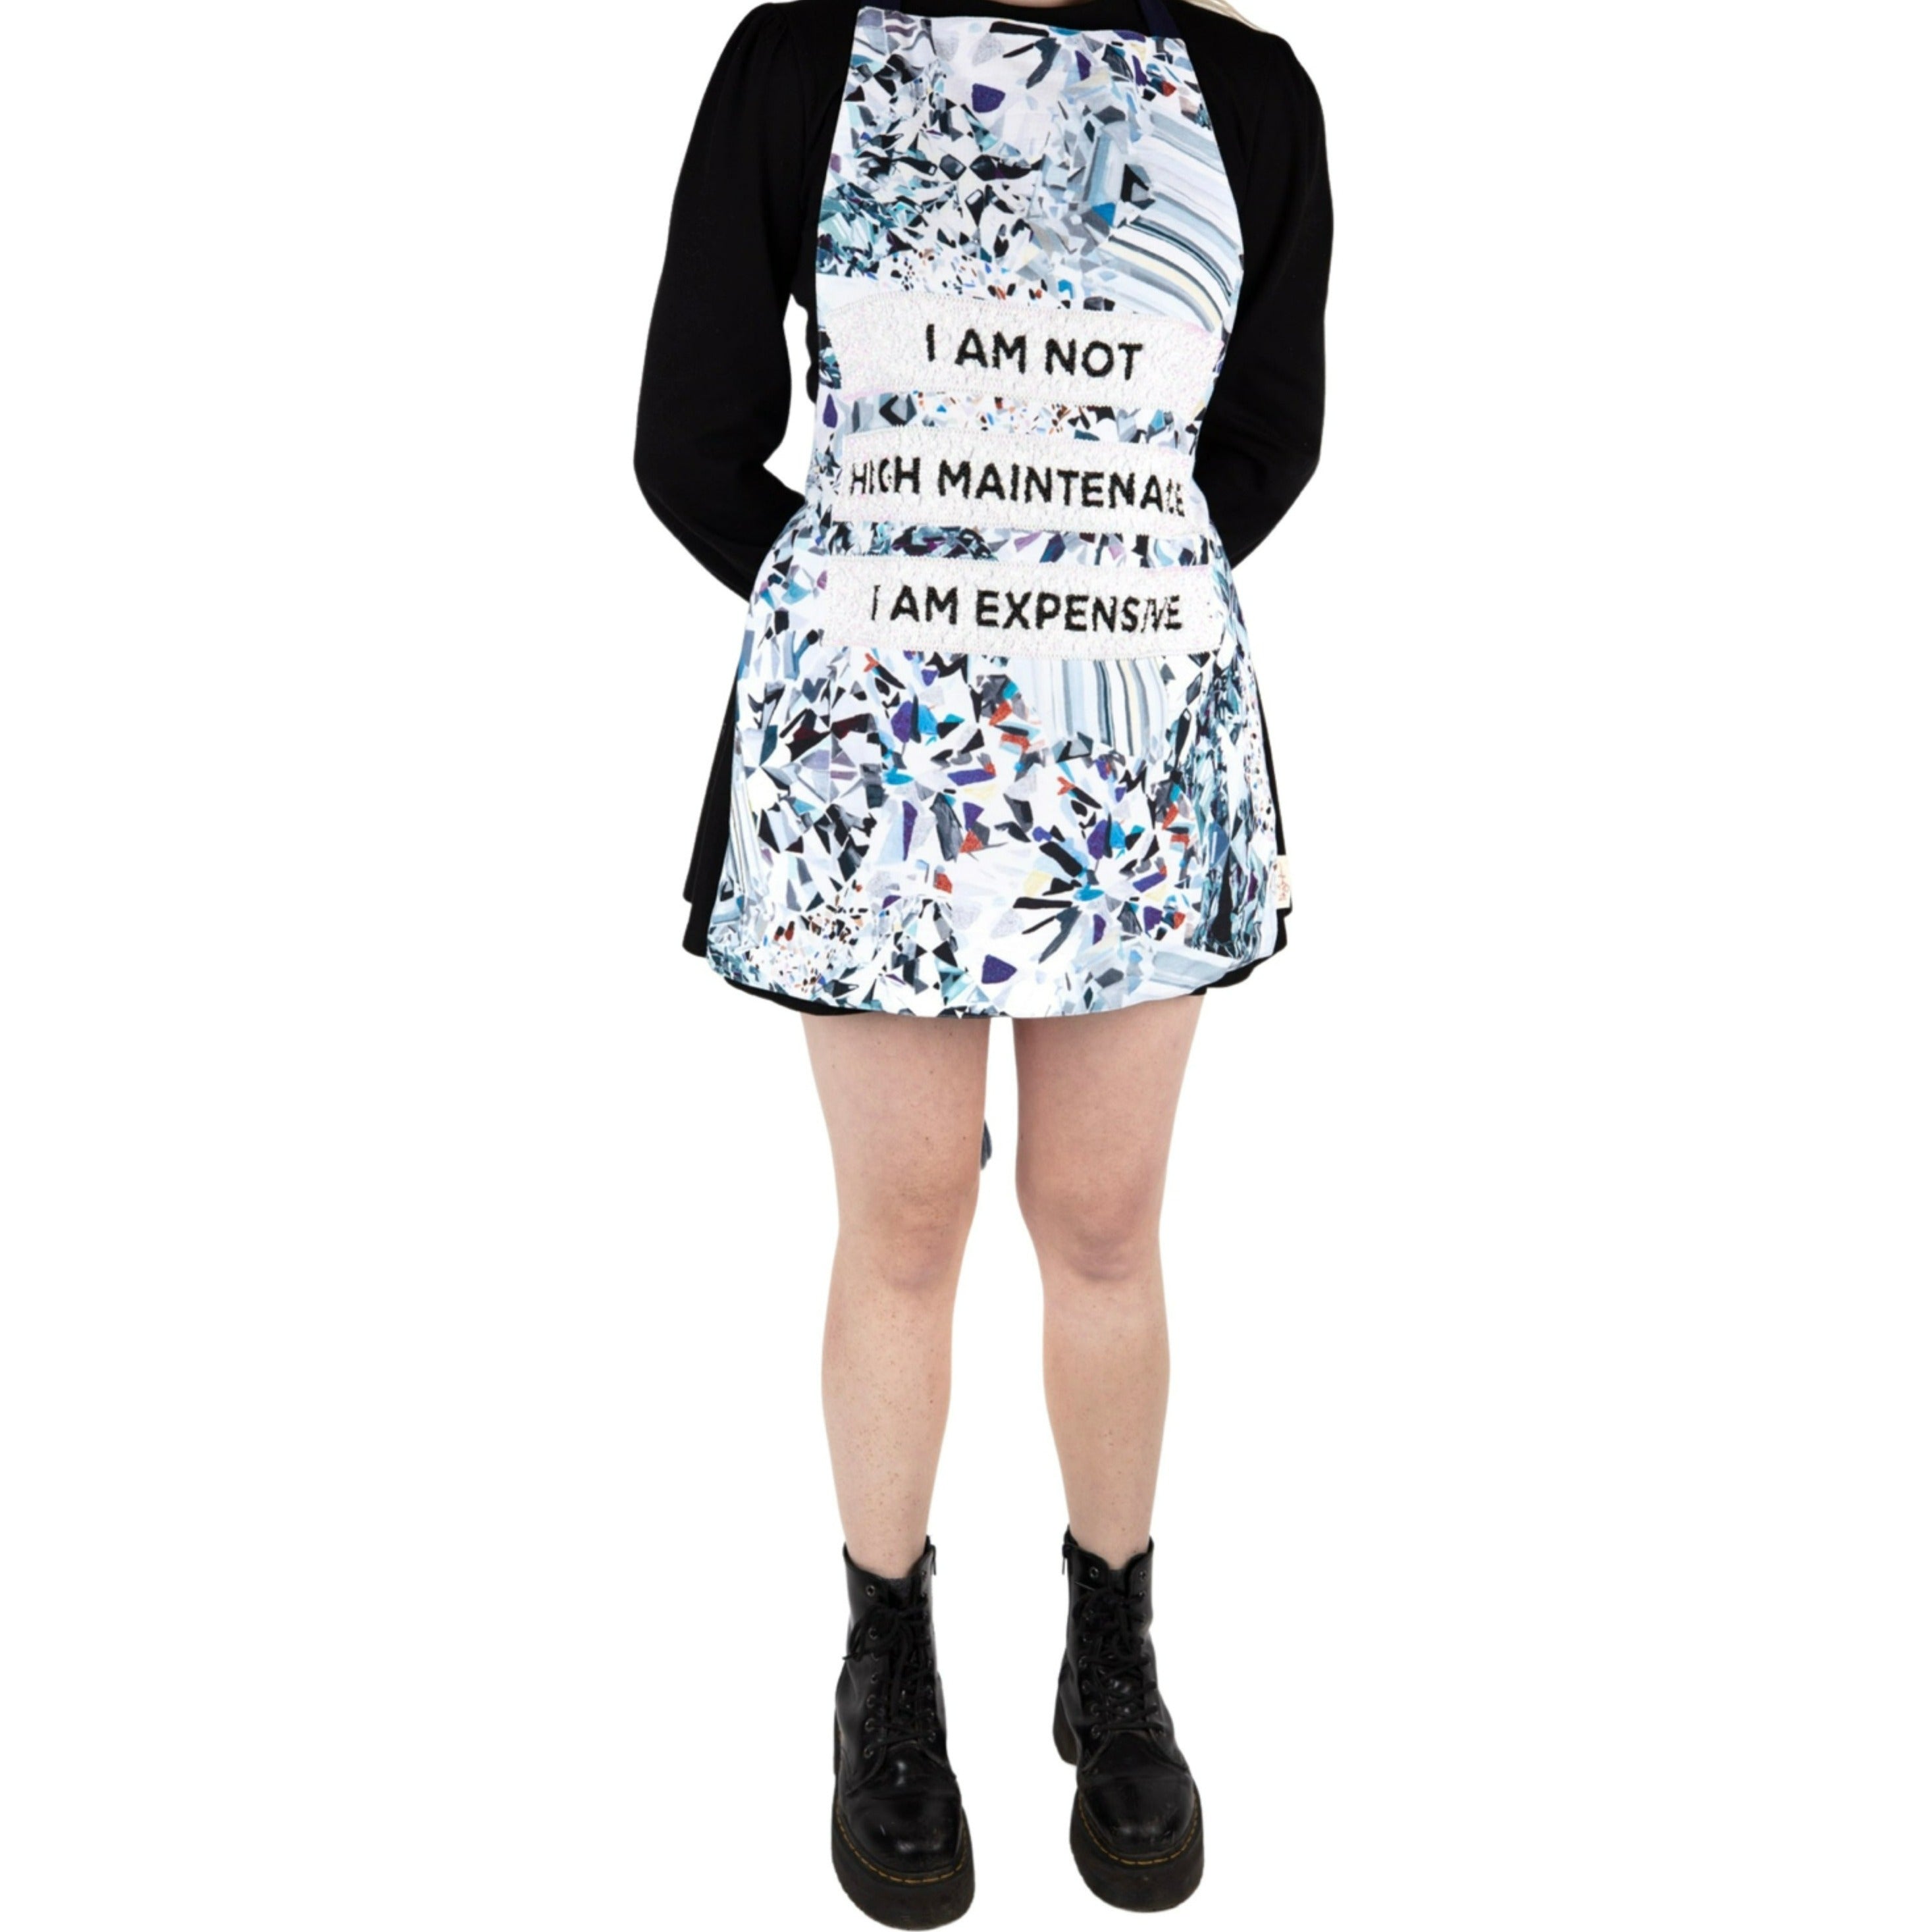 I made a fucking apron just for YOU!!! I Am Not High Maintenance. I Am Expensive. The good news is you can make your OWN damn money and buy whatever YOU want!! This apron is gemstone printed, hand-beaded GORGEOUSNESS and I made it just for YOU!! Be expensive... Be whatever you want!! YOU deserve it!! *One size fits most... Hand-embroidered linen with hand-beaded details. Dry Clean Only, Lightweight & Lined Linen Fabric, Ashley Longshore Signature Loop Tag.